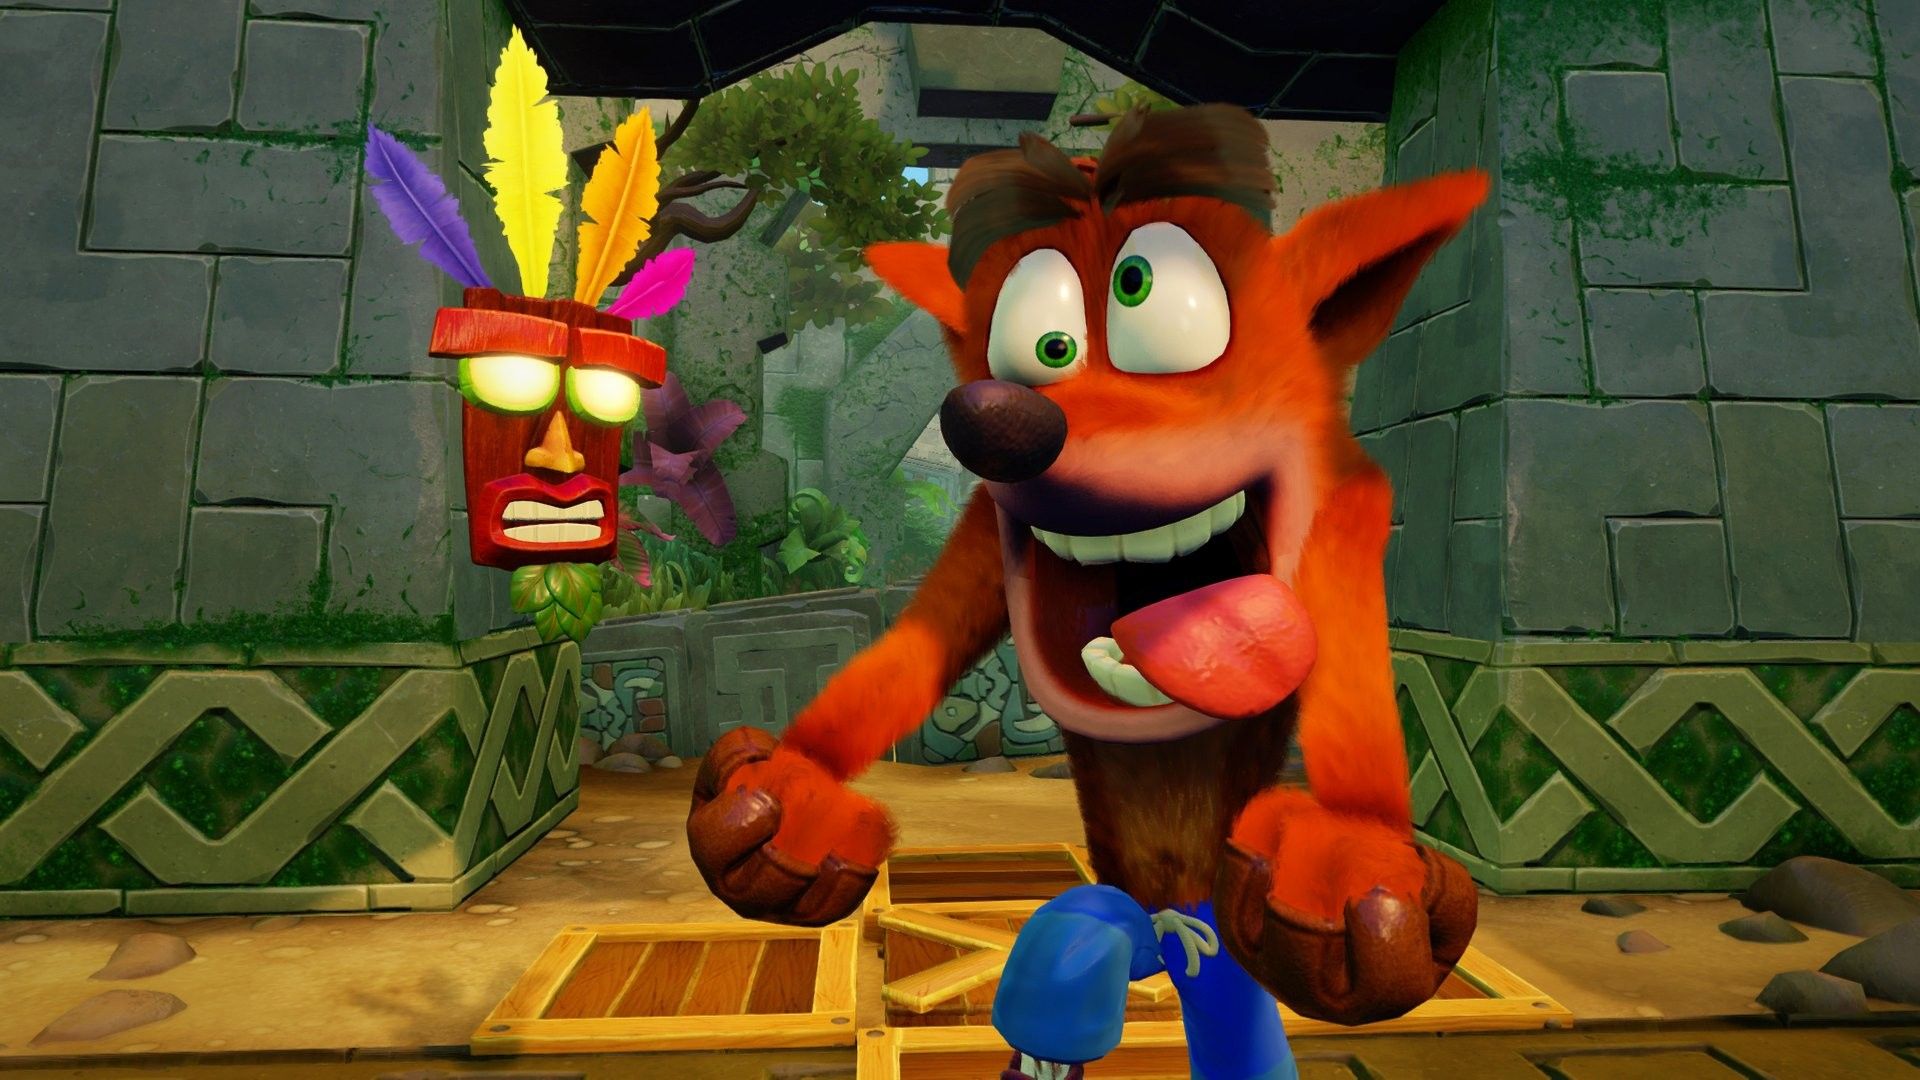 The New Crash Bandicoot Game Has The Odds Stacked Against It